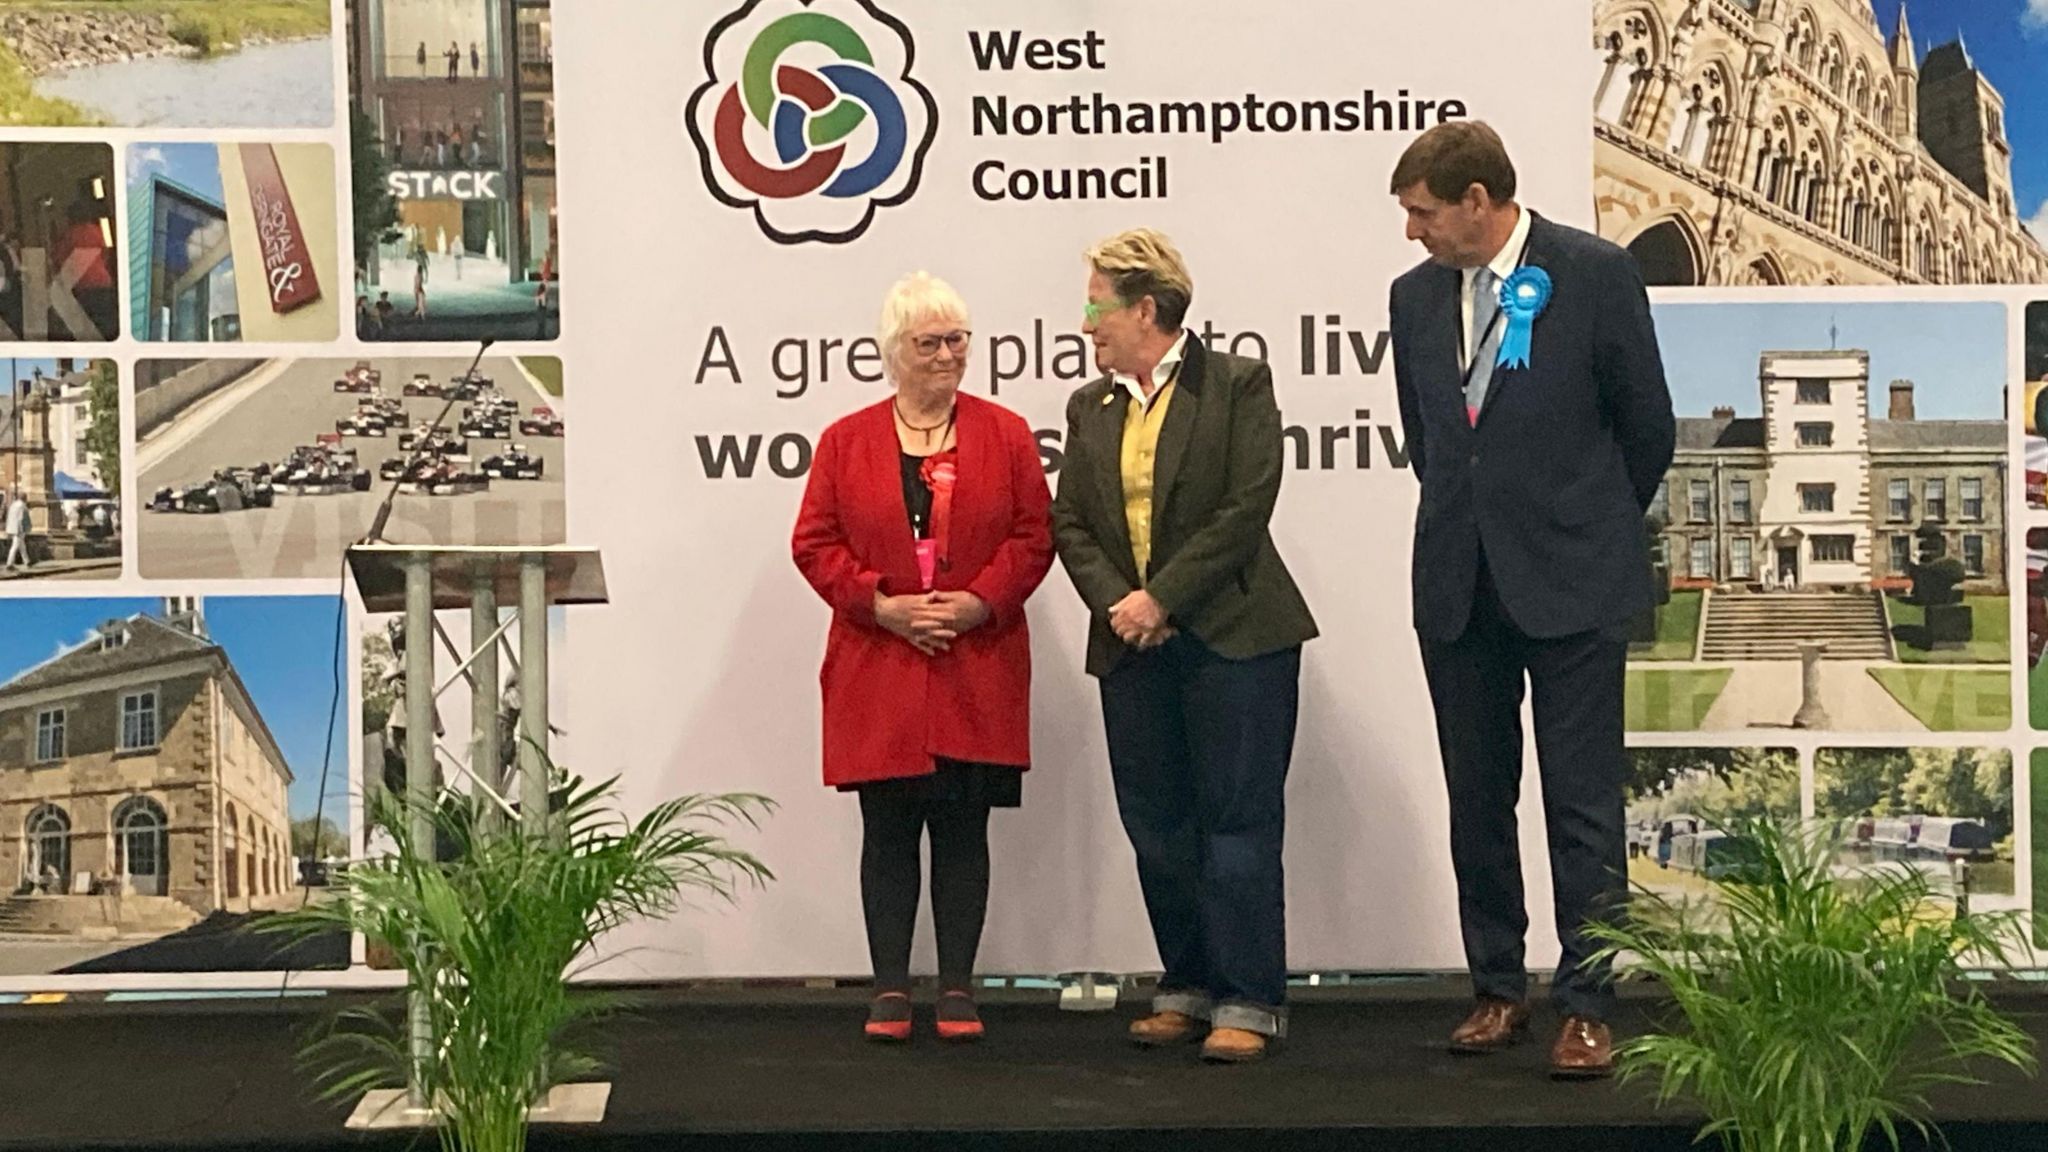 Three candidates standing on stage at the count